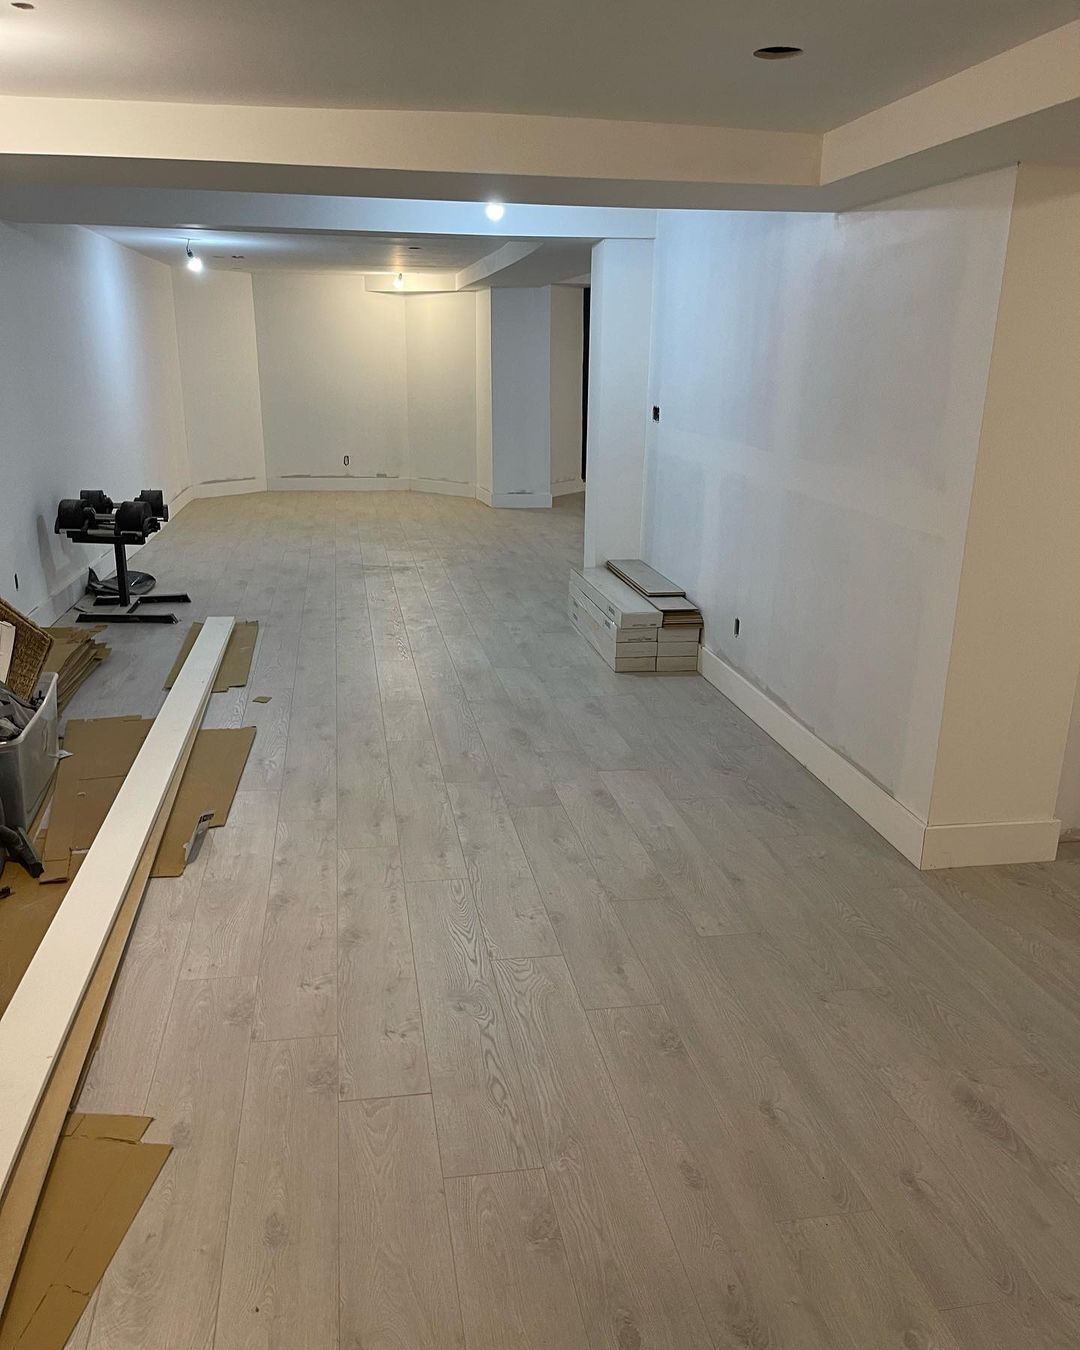 Laminate flooring with DMX for the basement